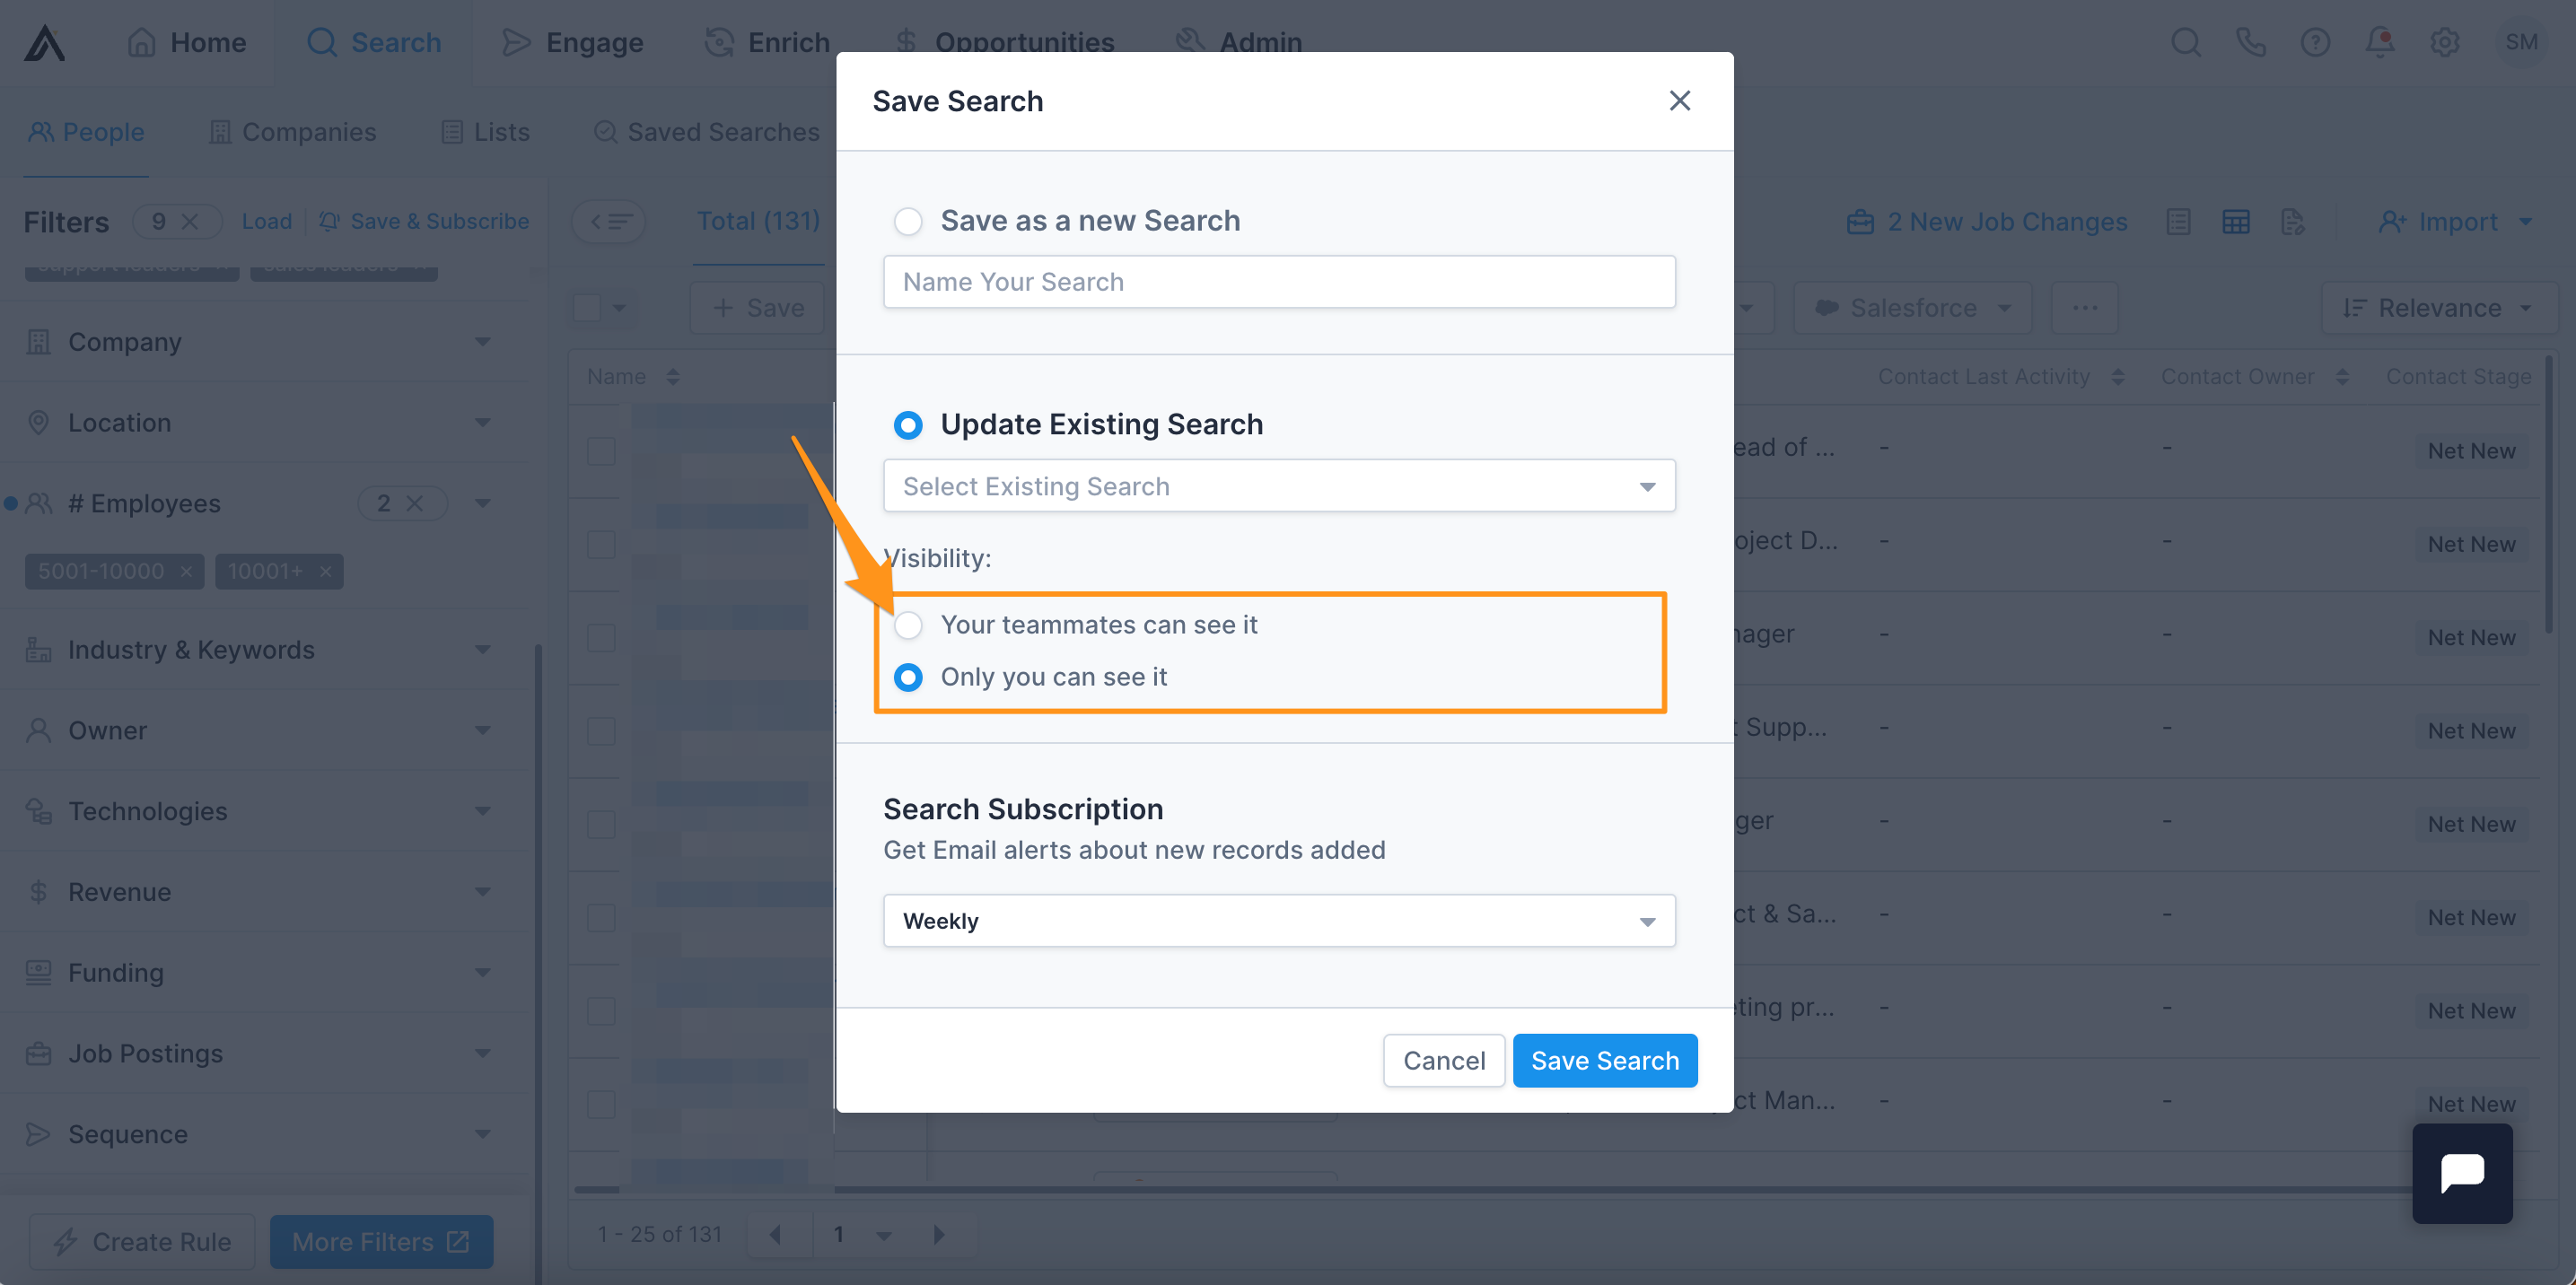 Existing Search Visibility